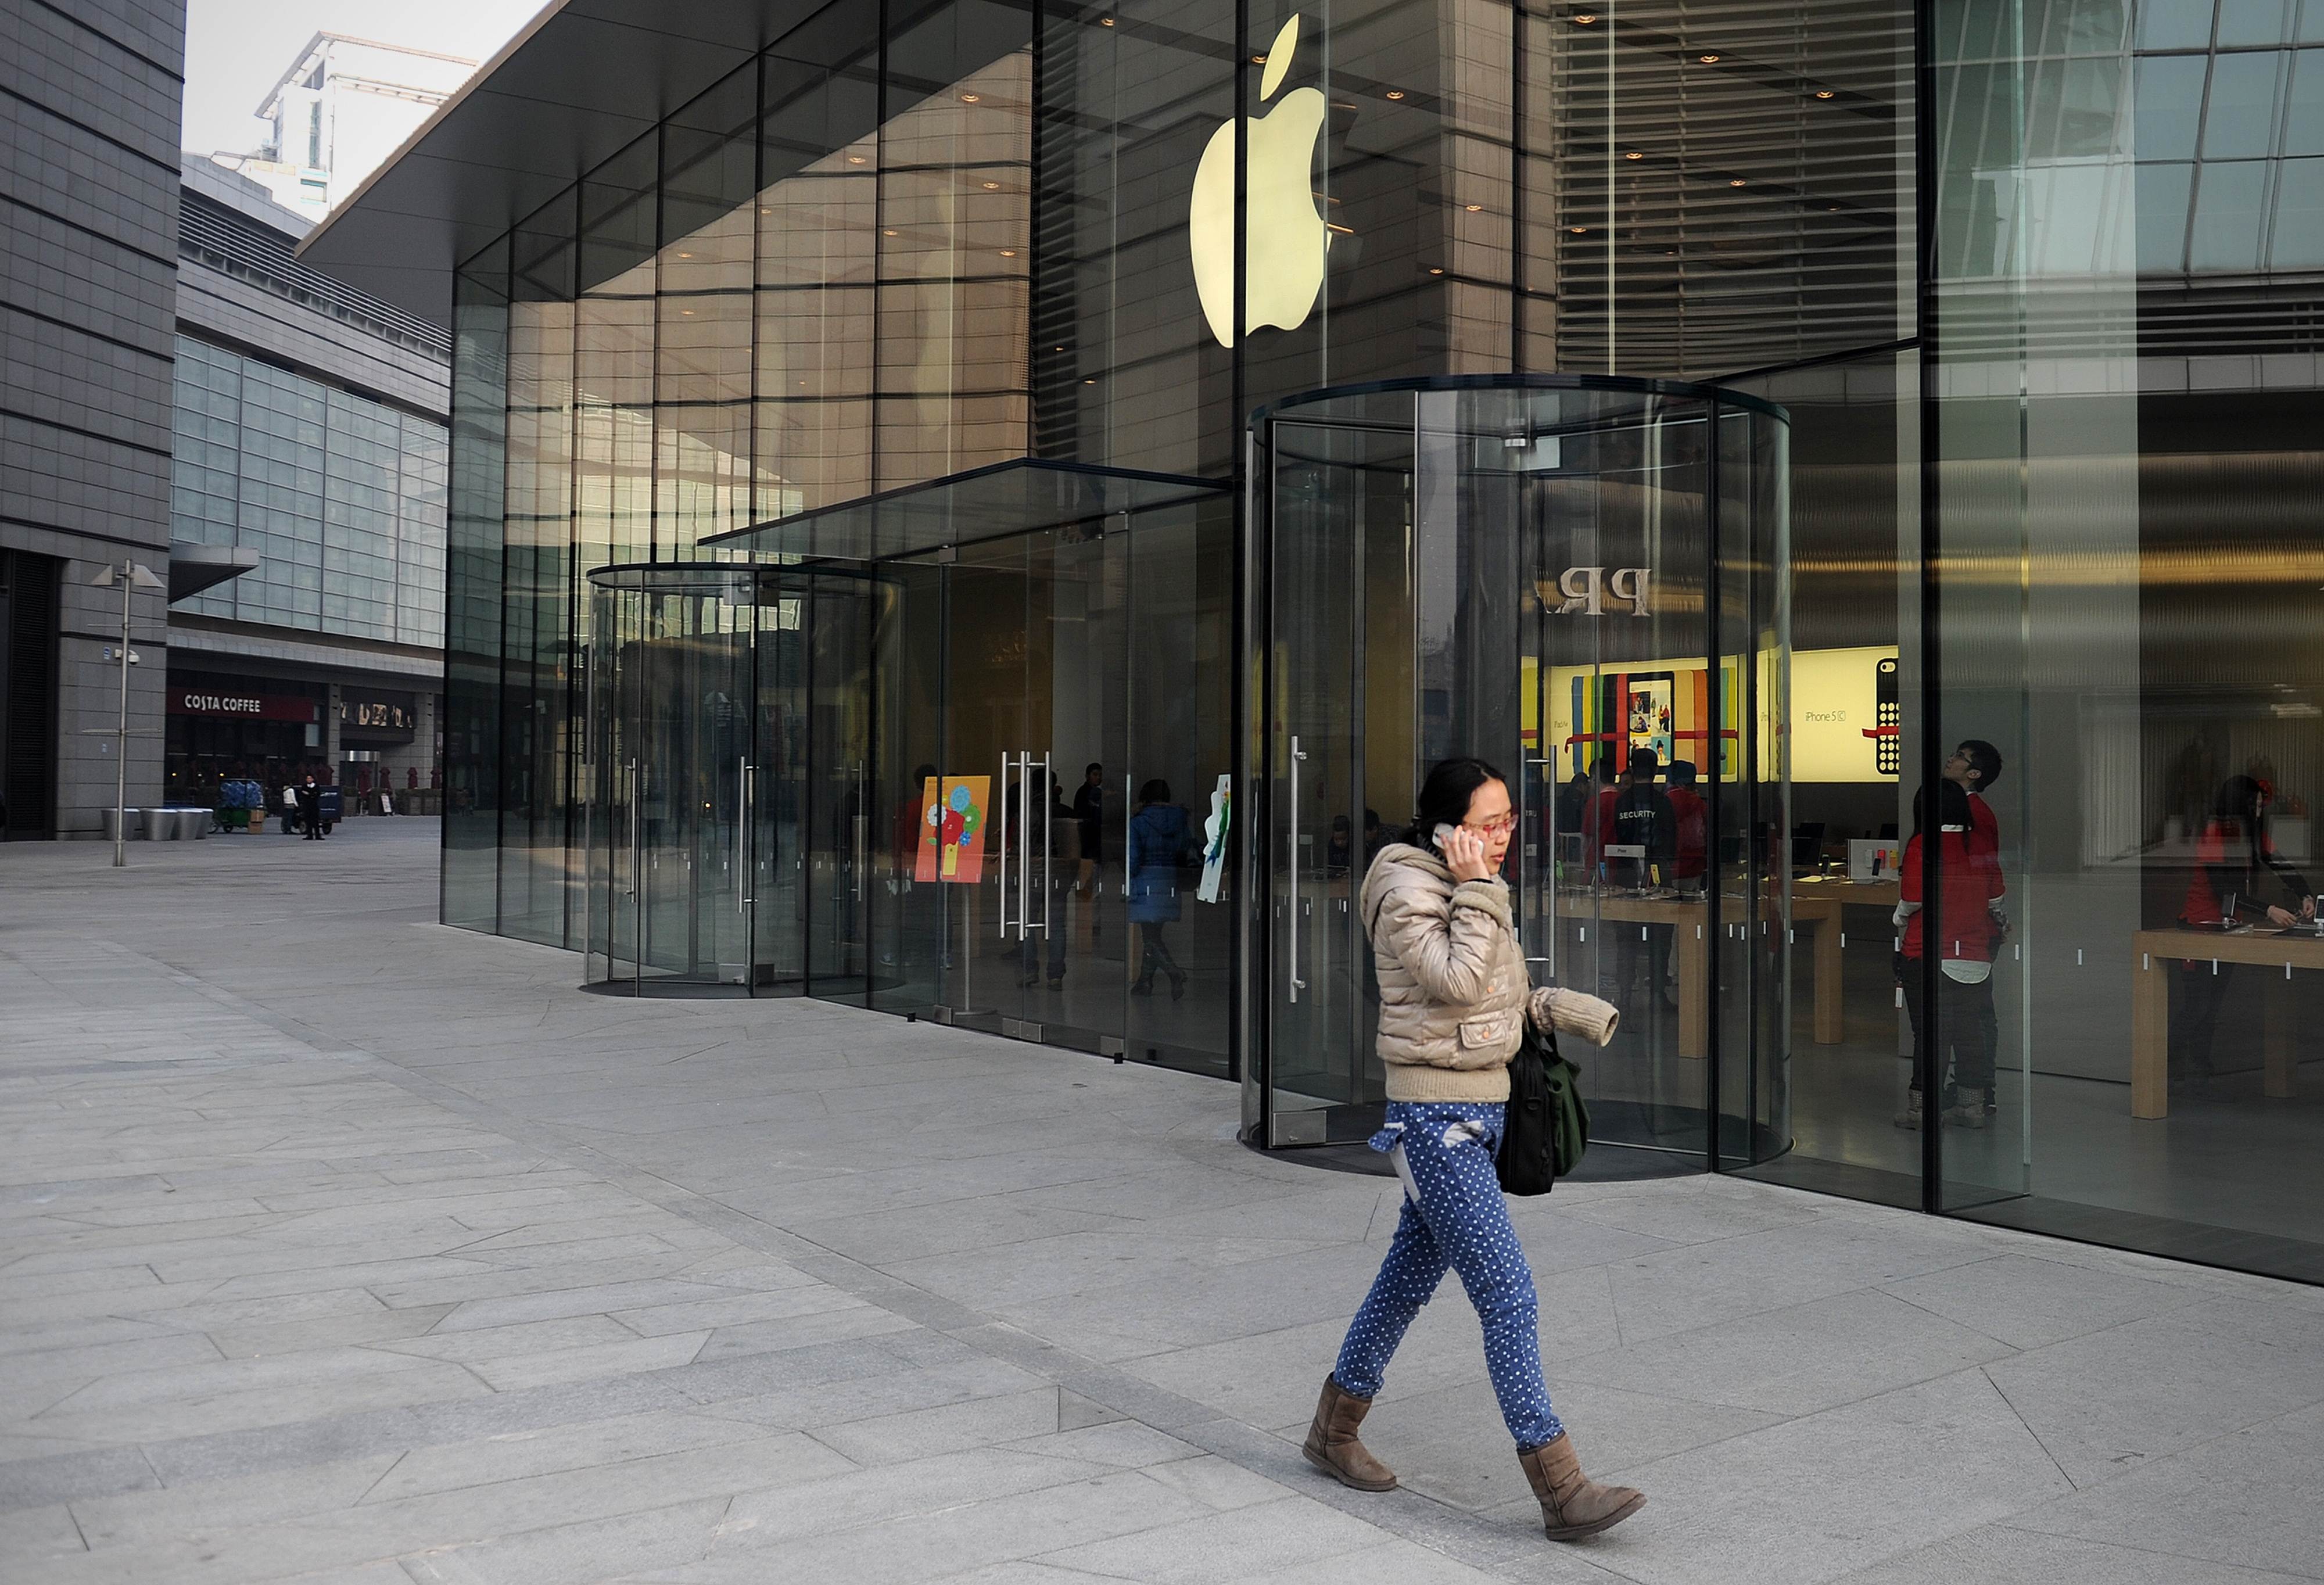 A woman uses a mobile phone as she walks past an Apple store in Beijing on January 17, 2014.Photo: AFP